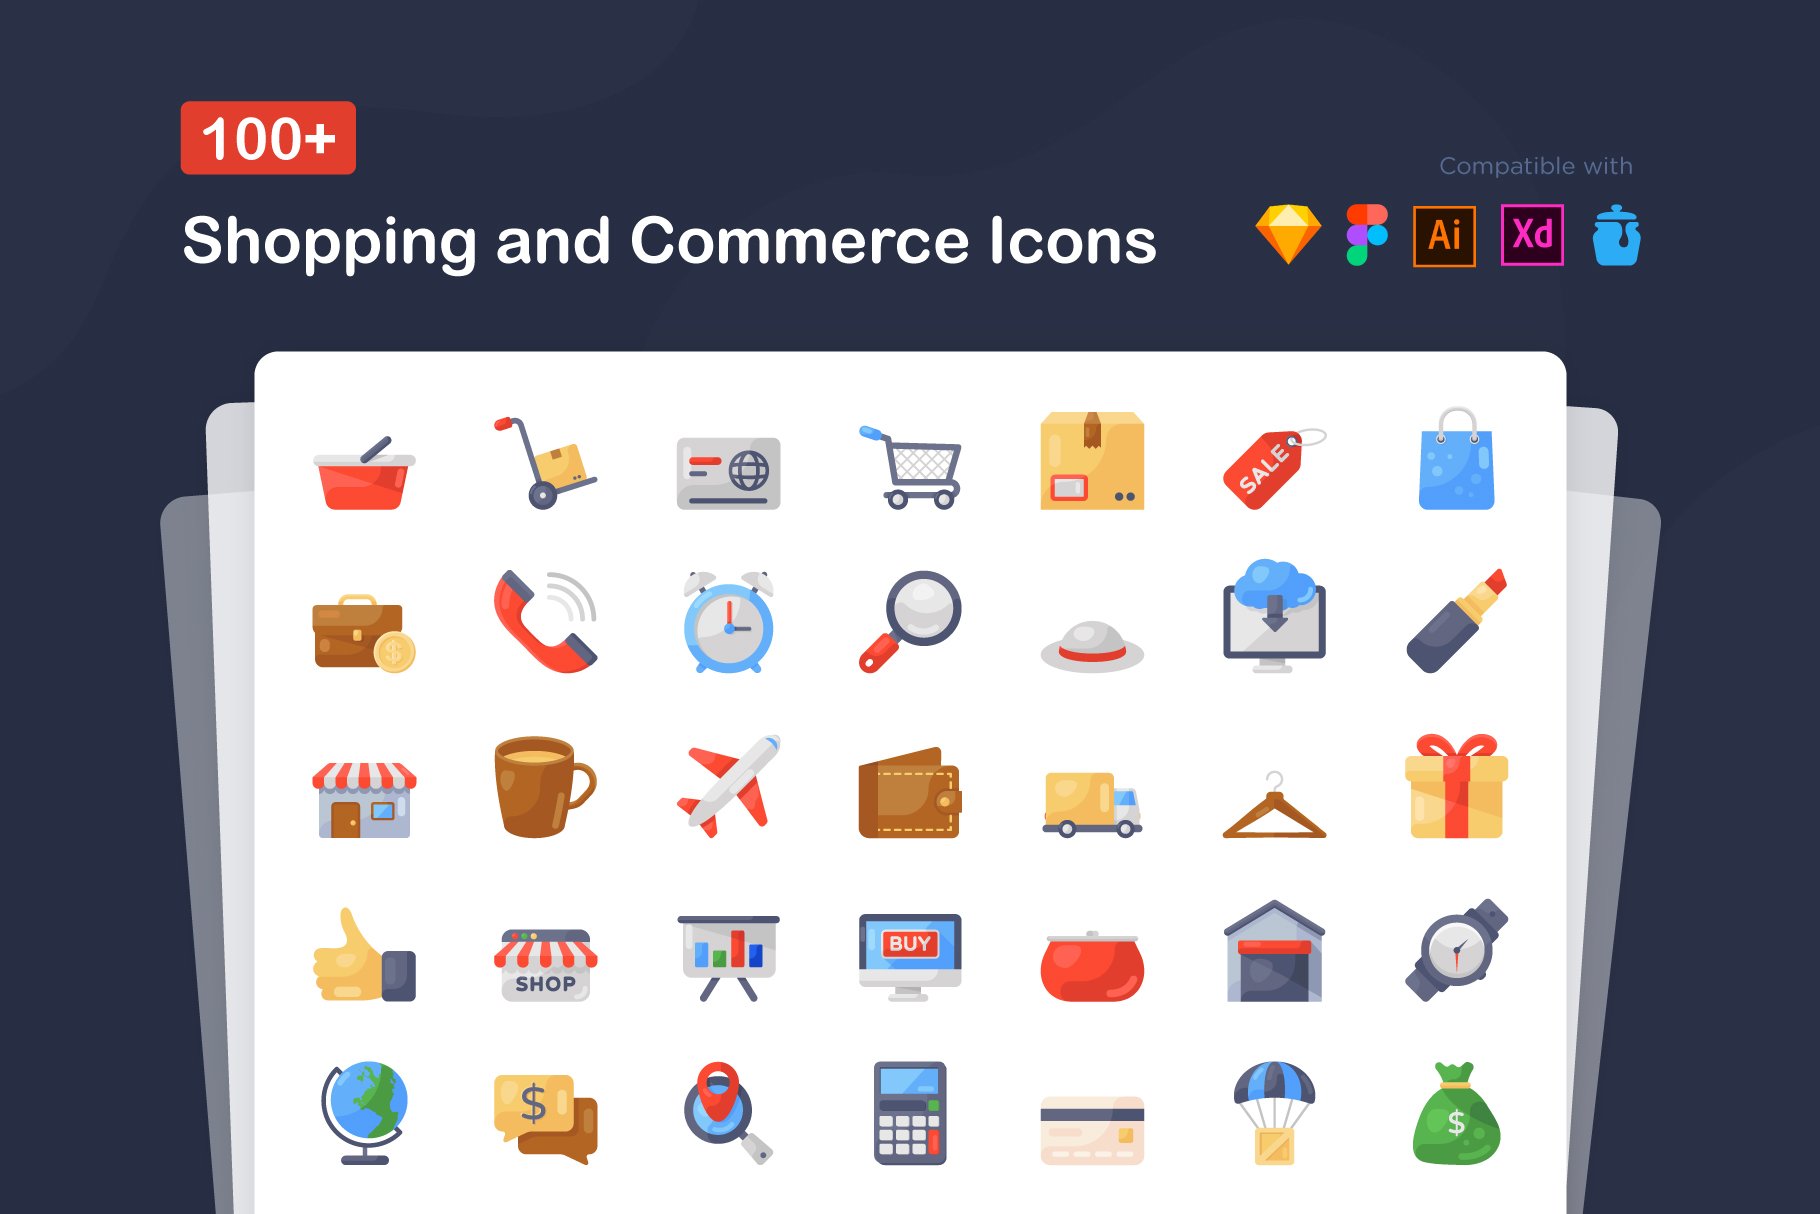 Shopping and Commerce Icons cover image.